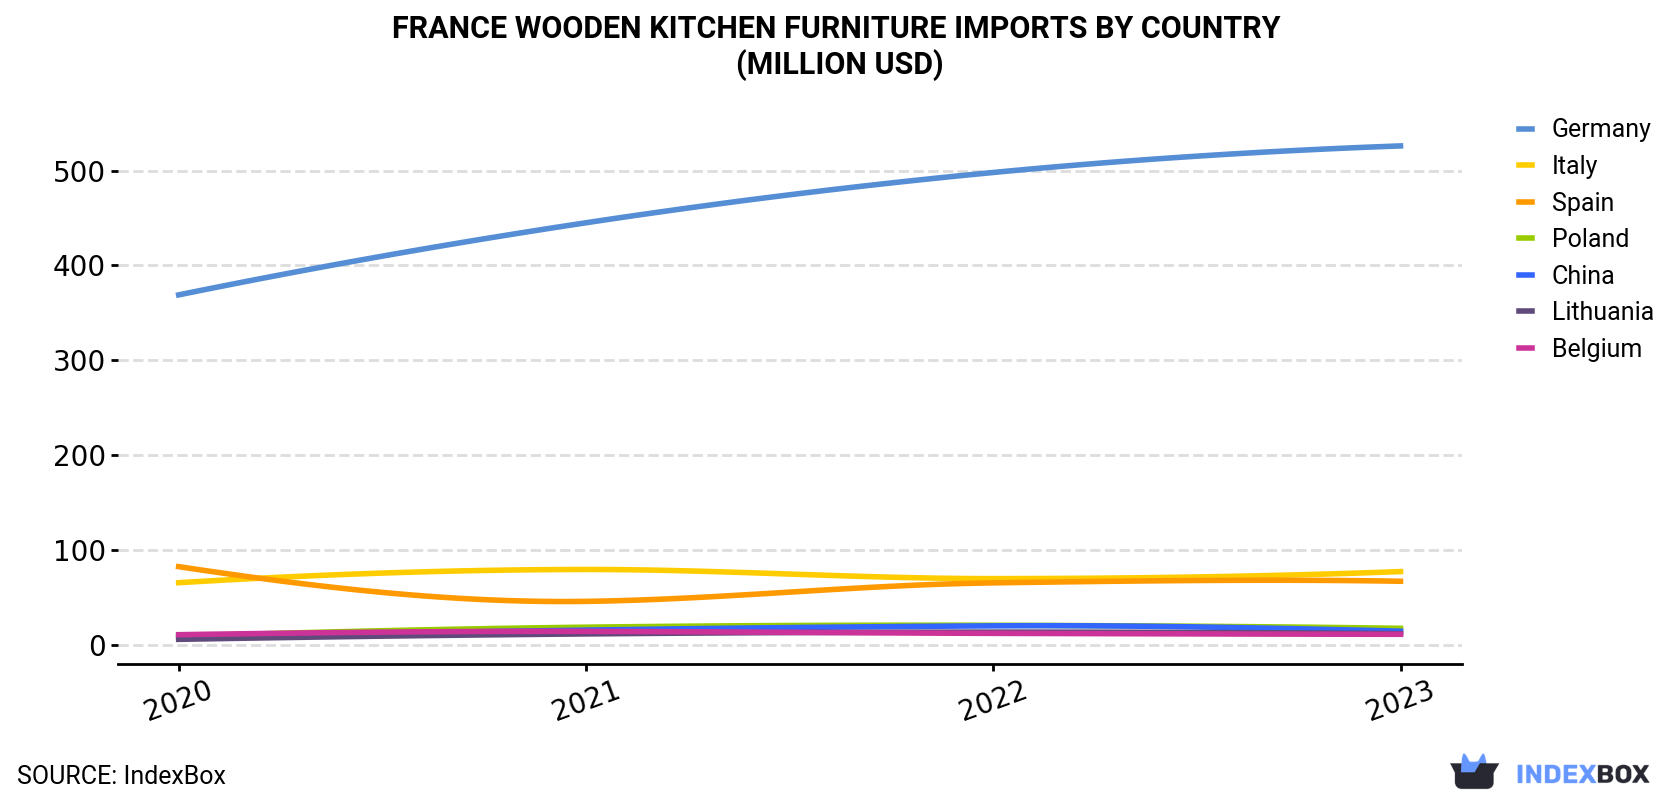 France Wooden Kitchen Furniture Imports By Country (Million USD)